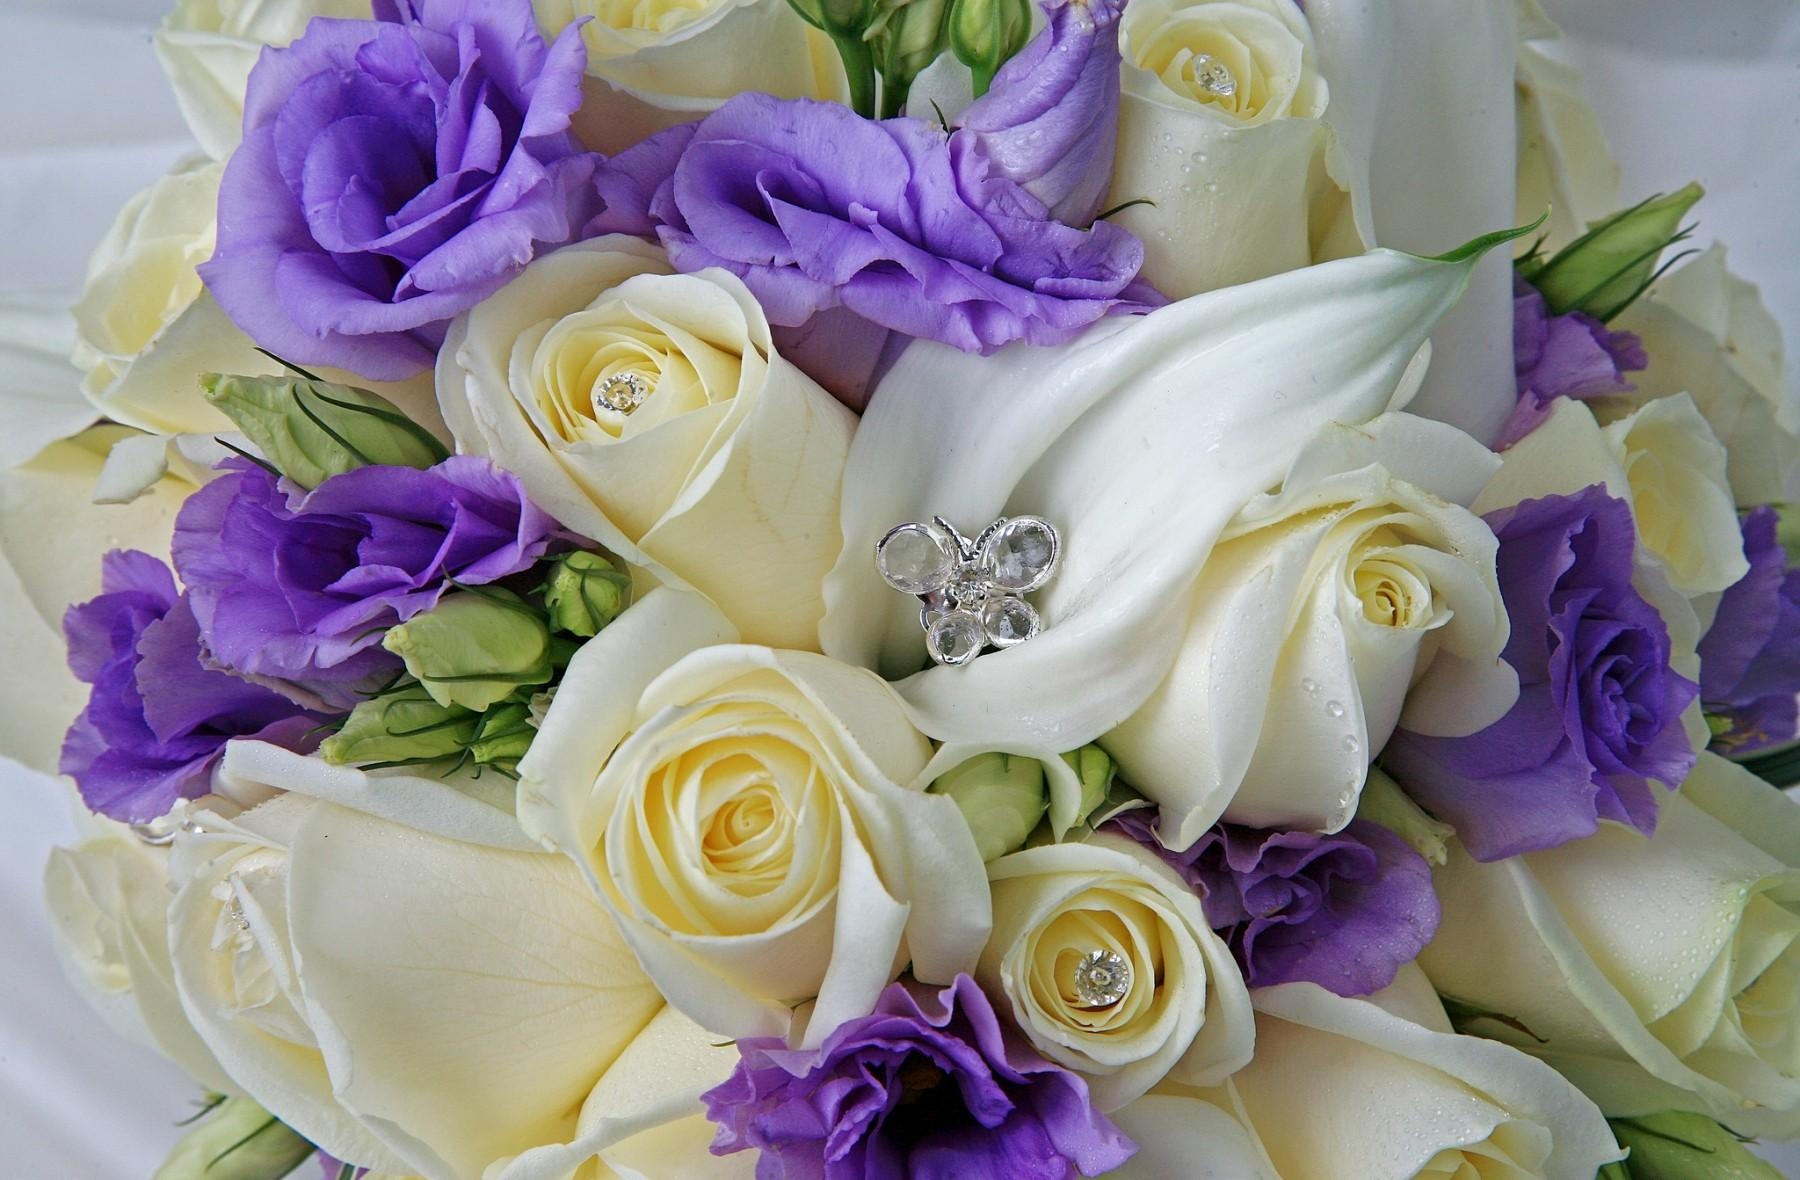 Free HD drops, roses, flowers, decorations, bouquet, lisiantus russell, lisianthus russell